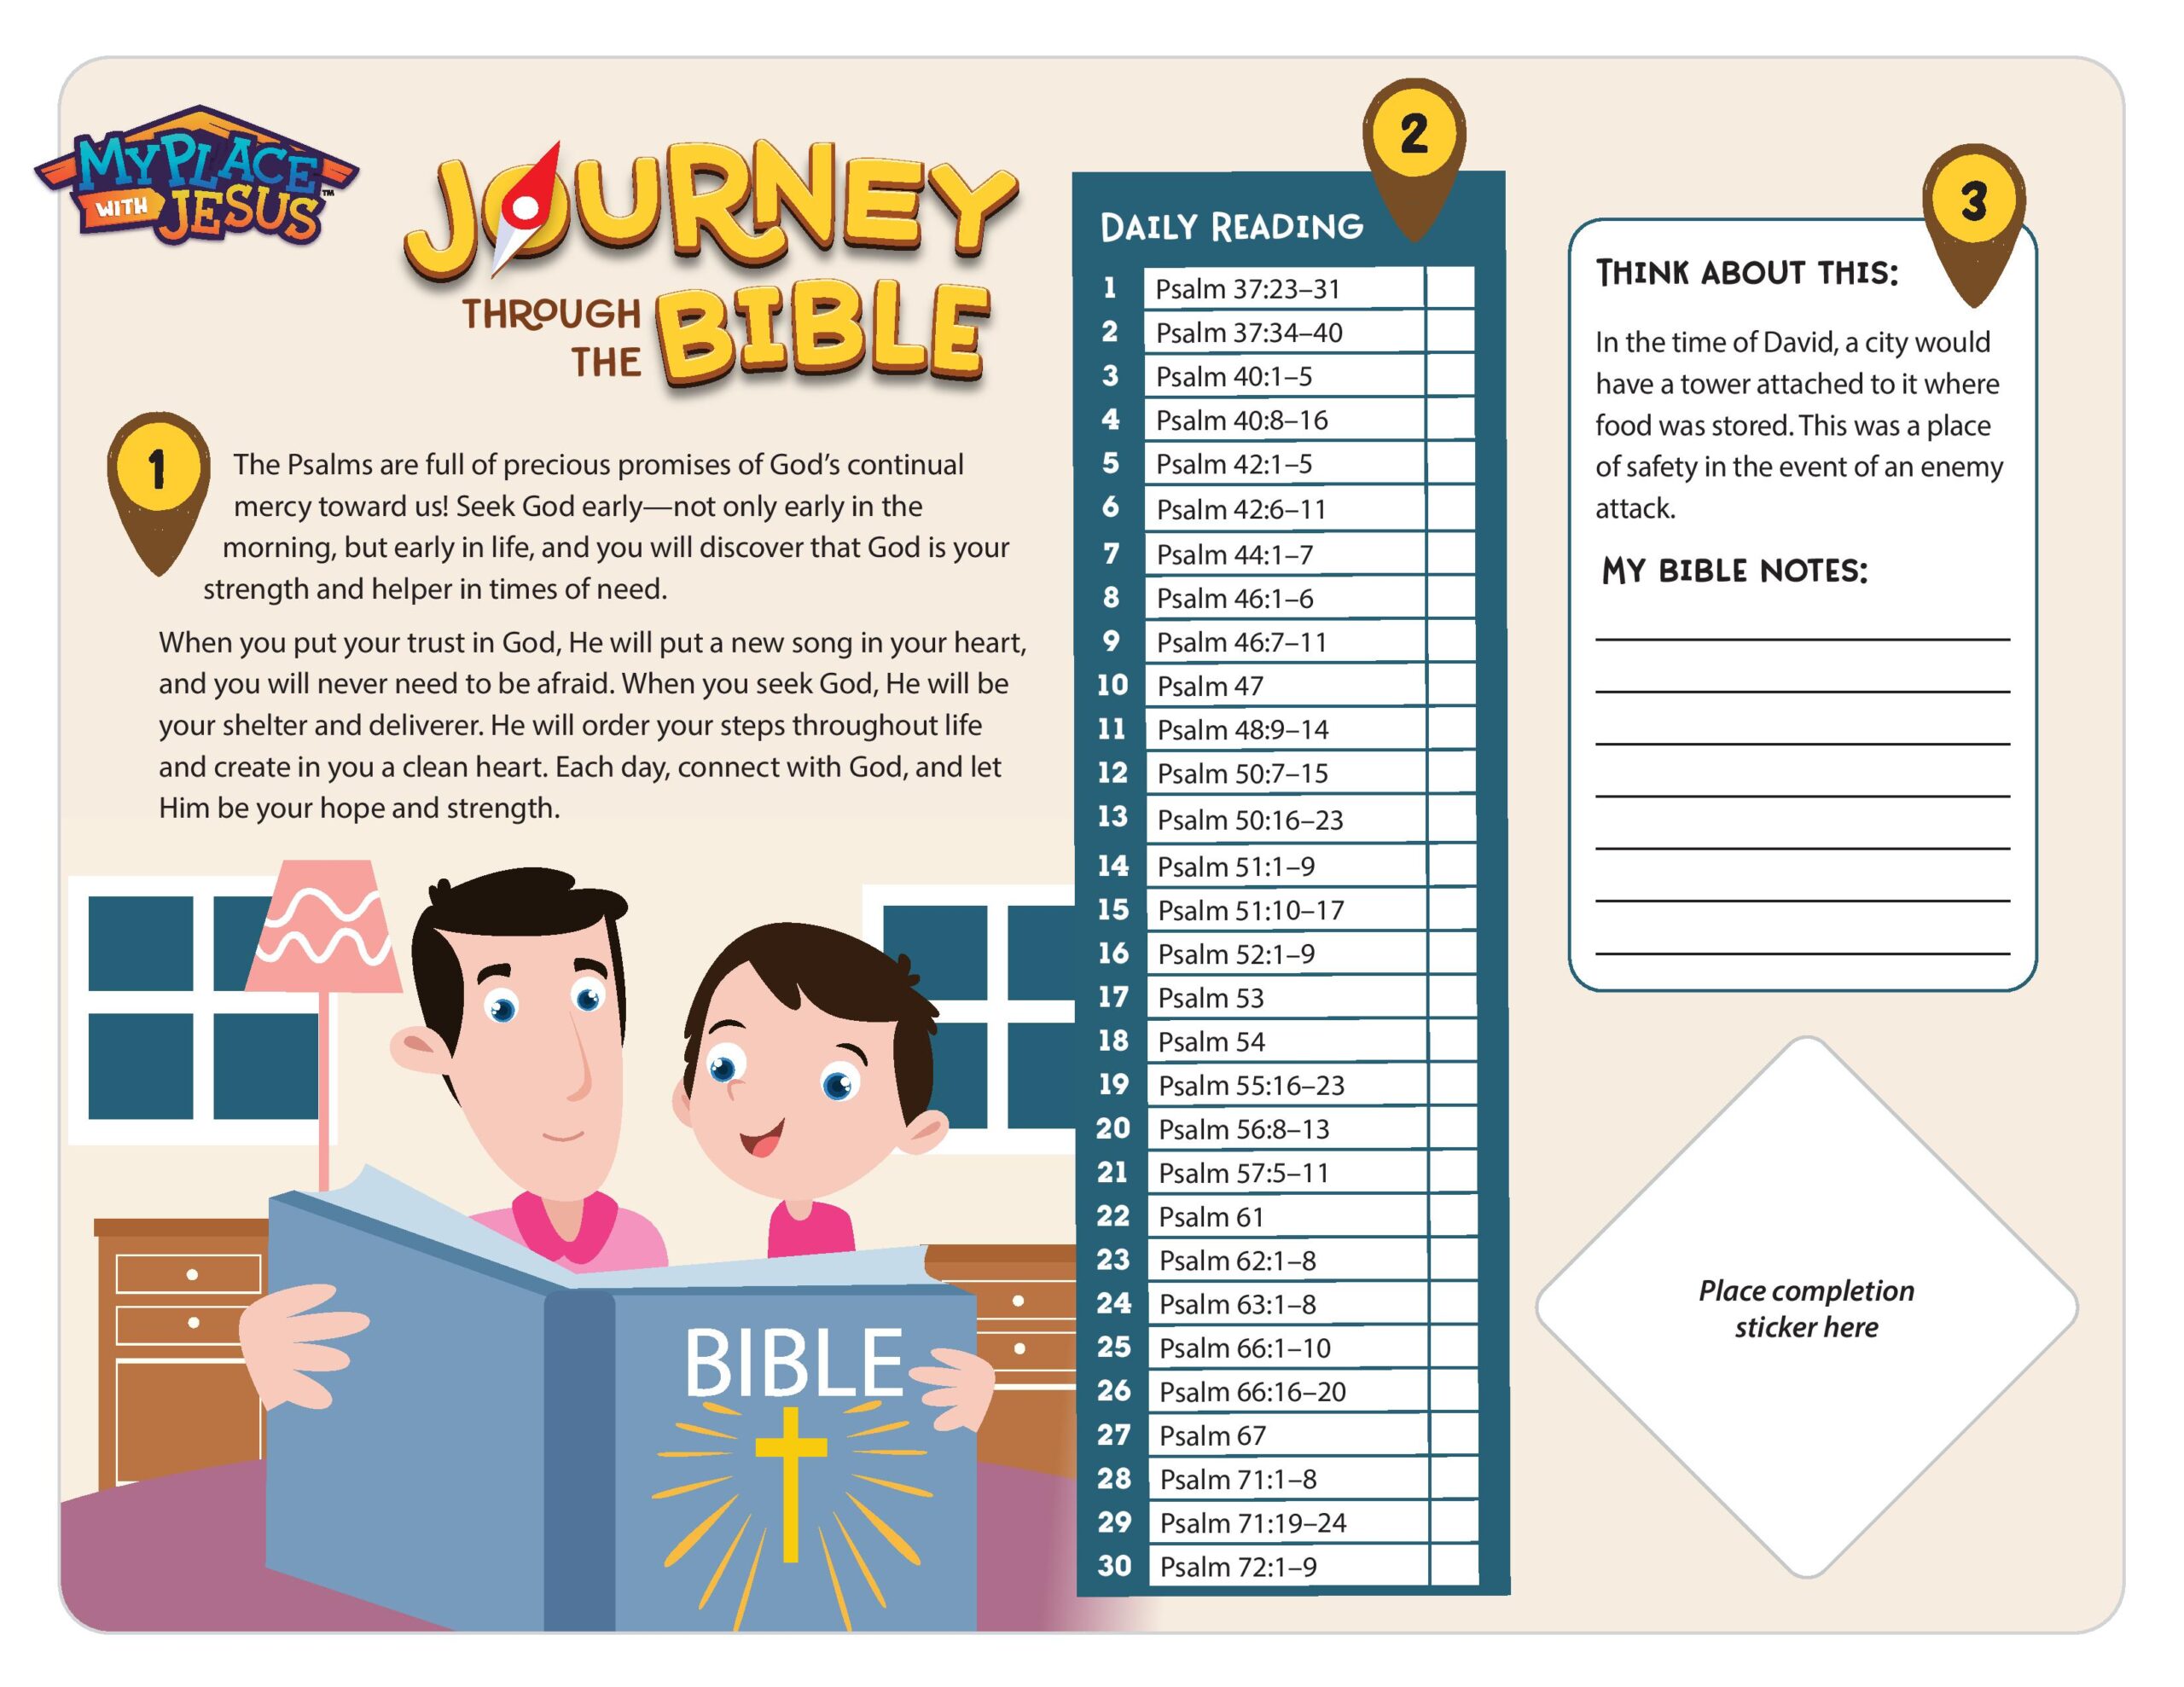 Download the November Journey Through the Bible